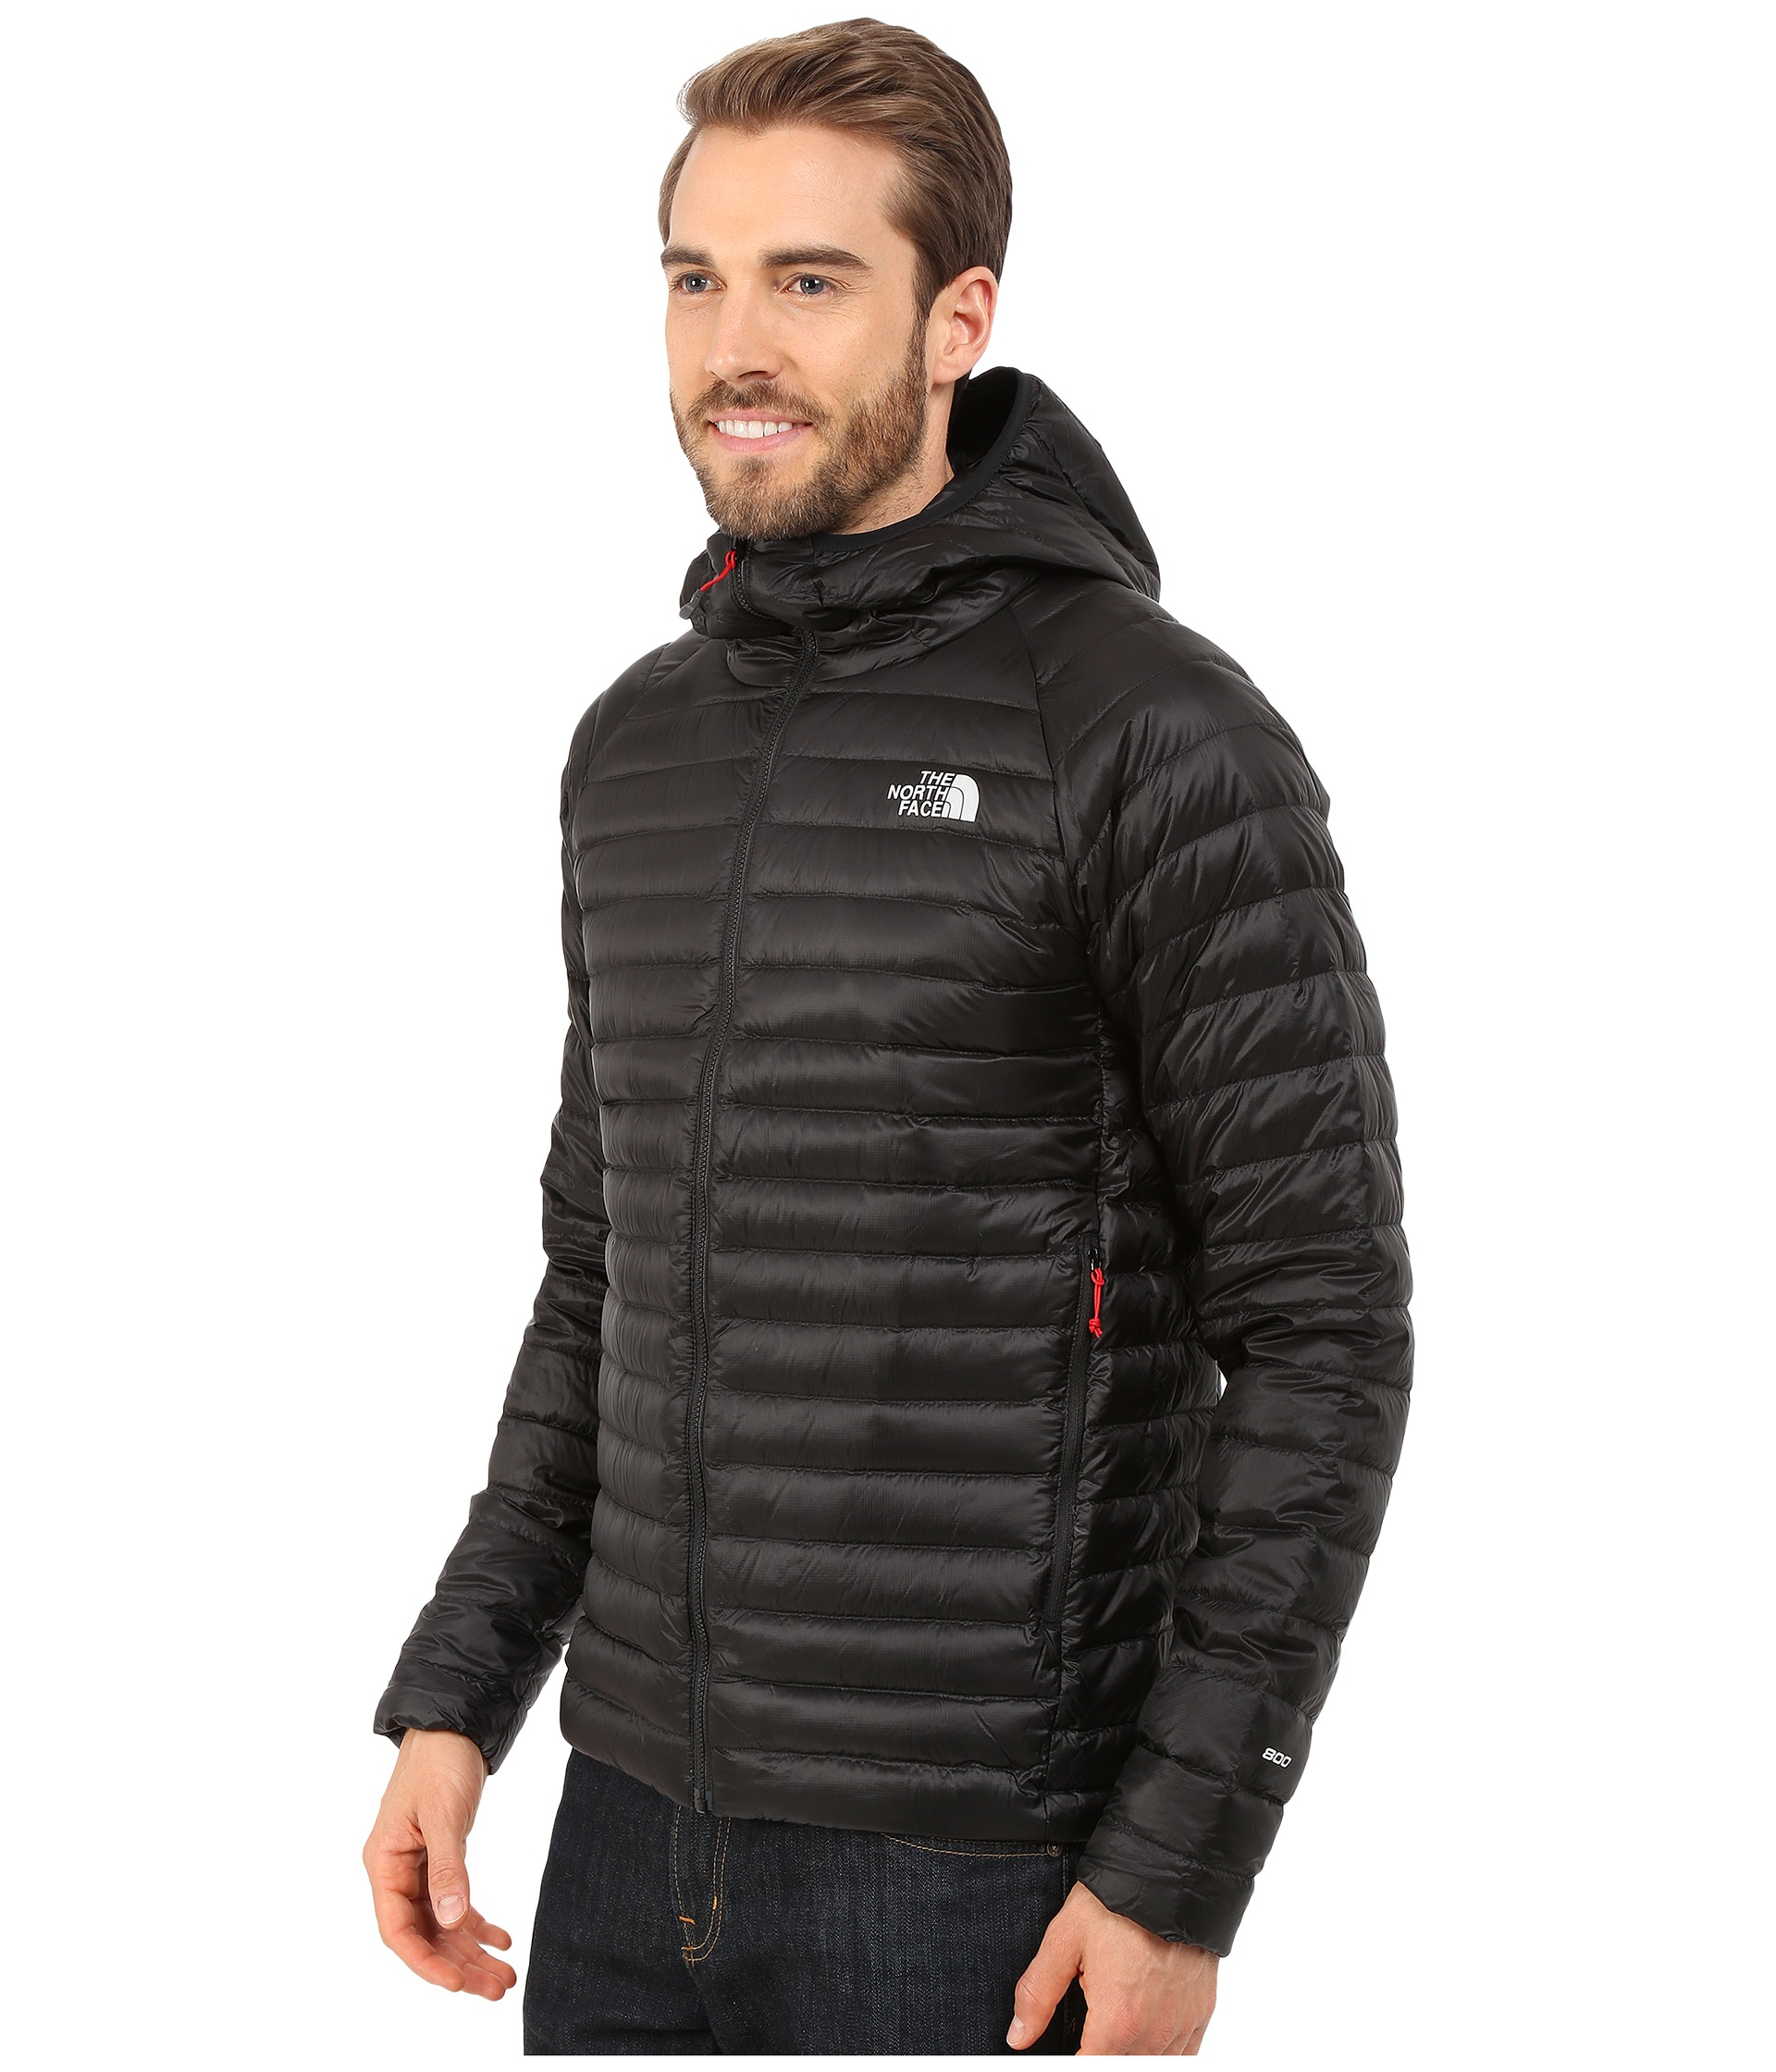 Download Lyst - The North Face Quince Hooded Jacket in Black for Men